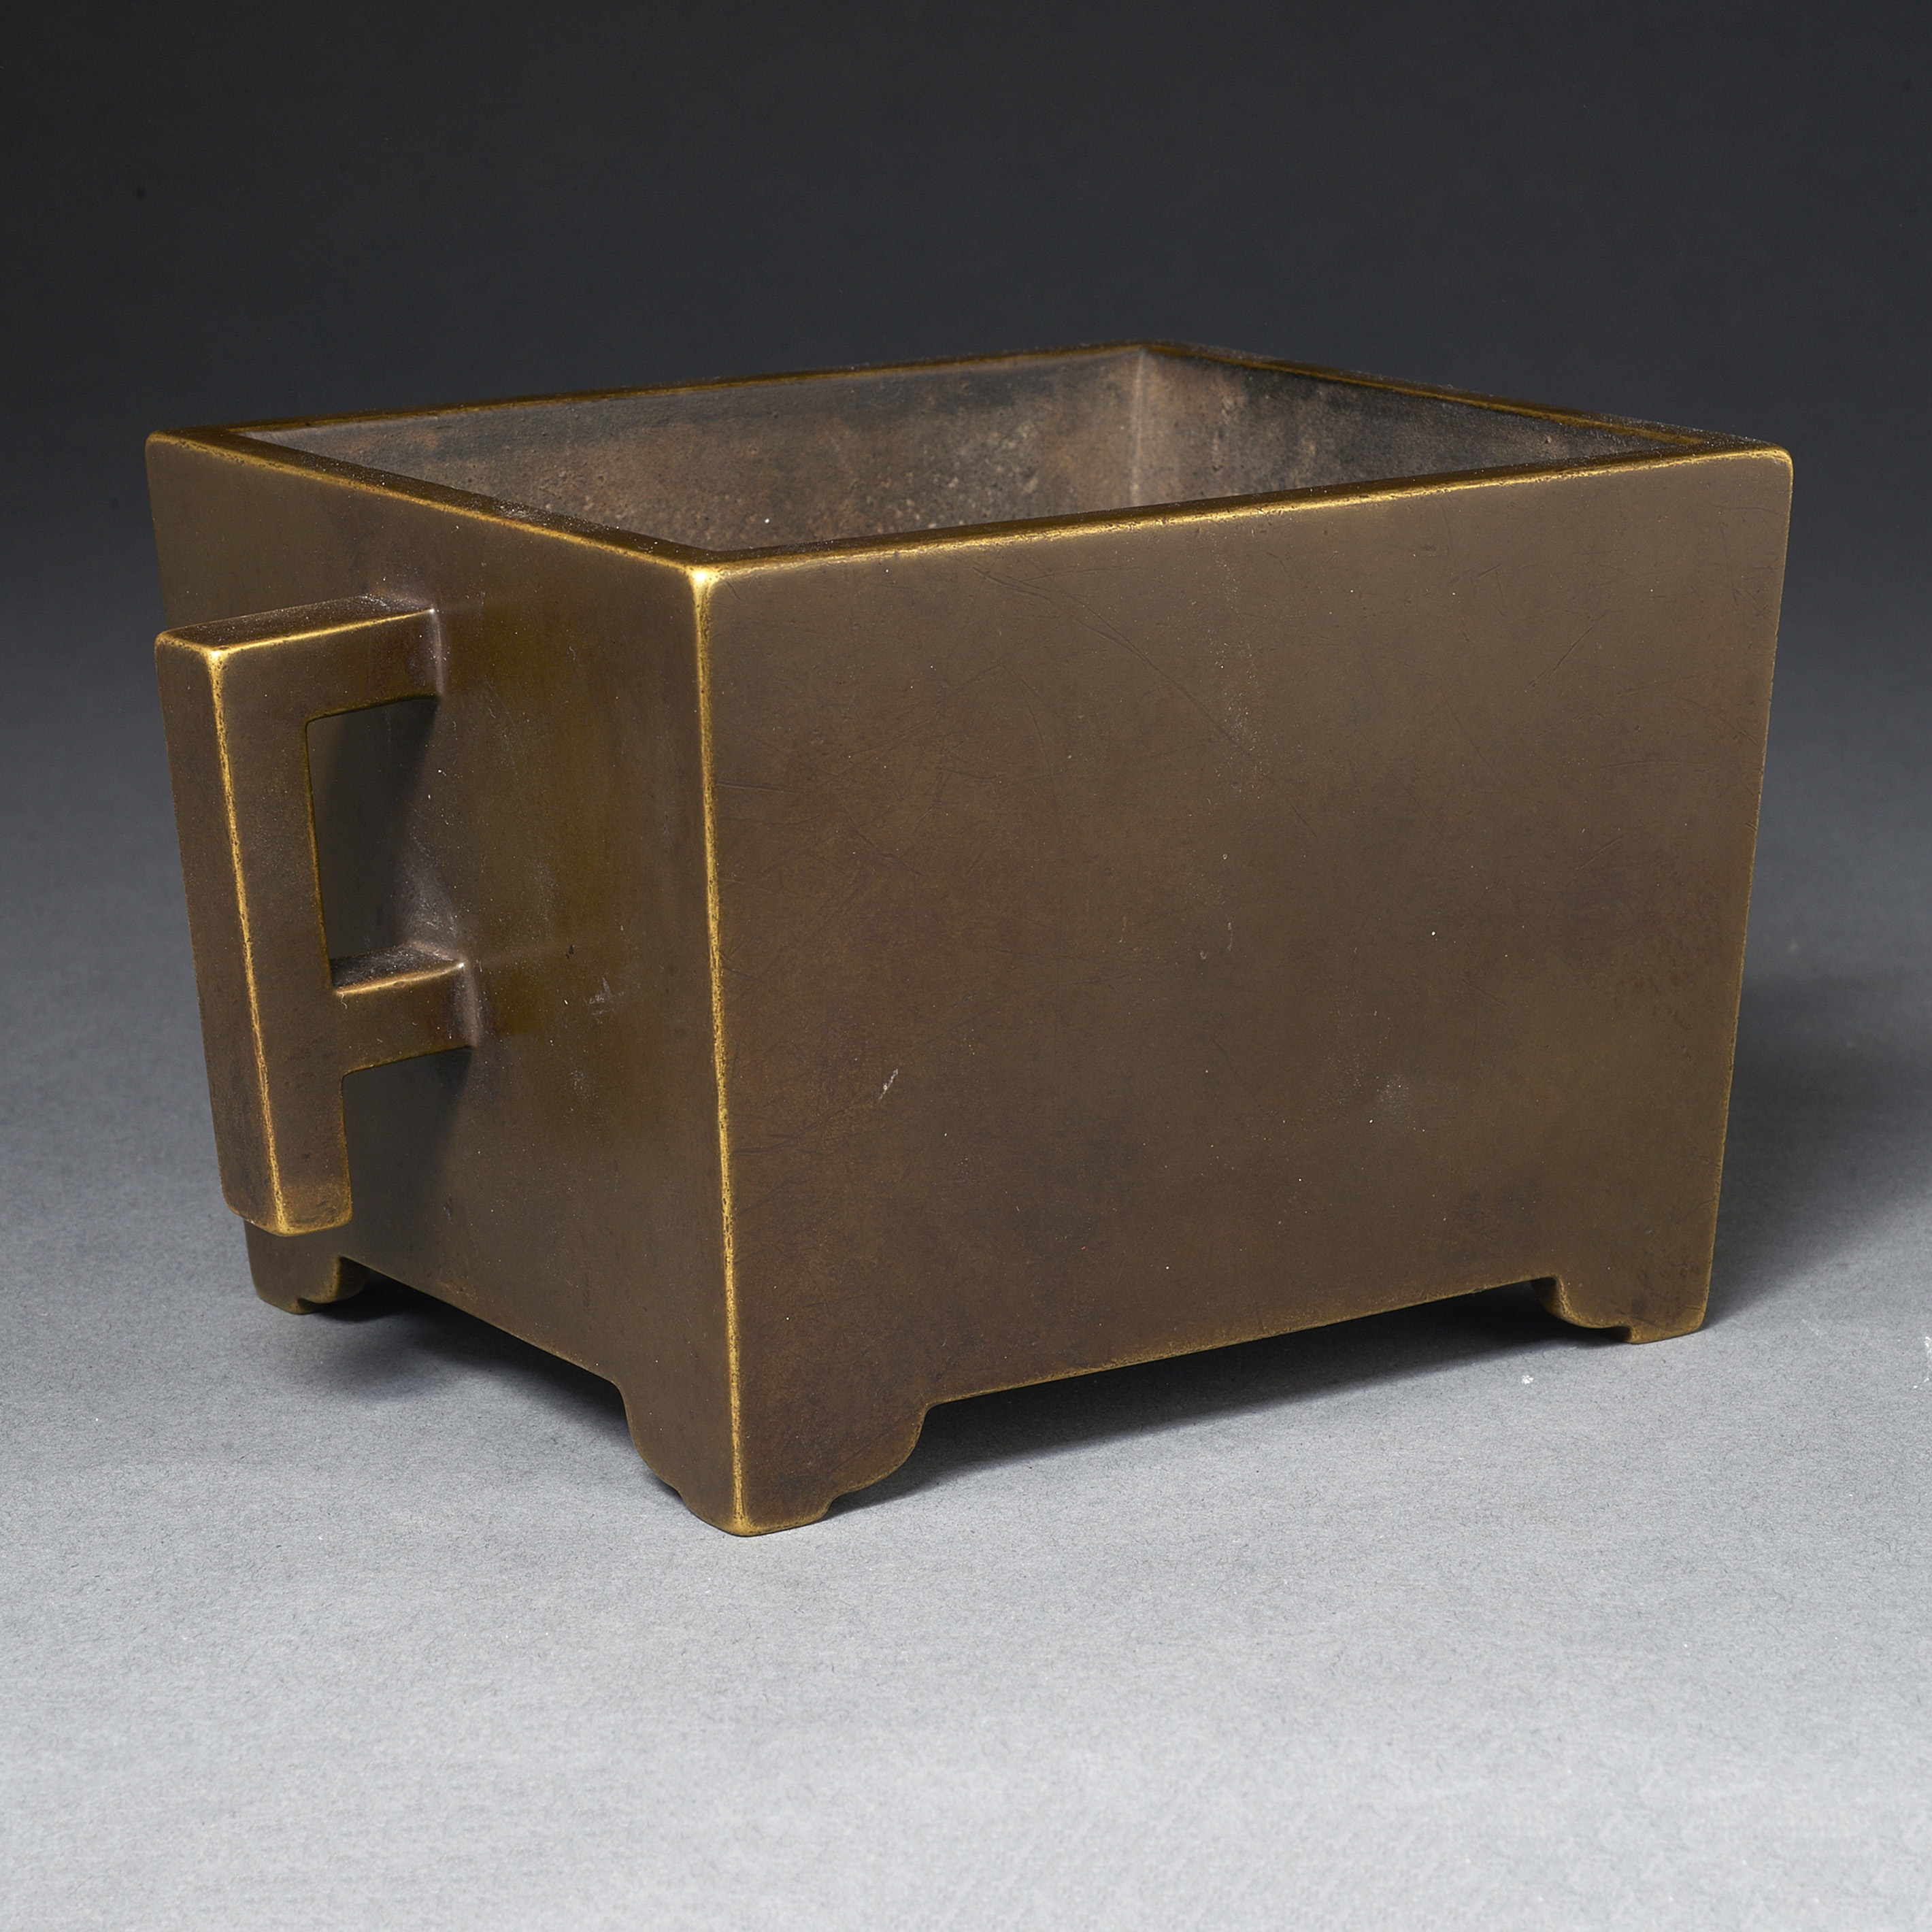 CHINESE SQUARE FORM BRONZE CENSER 3a494b